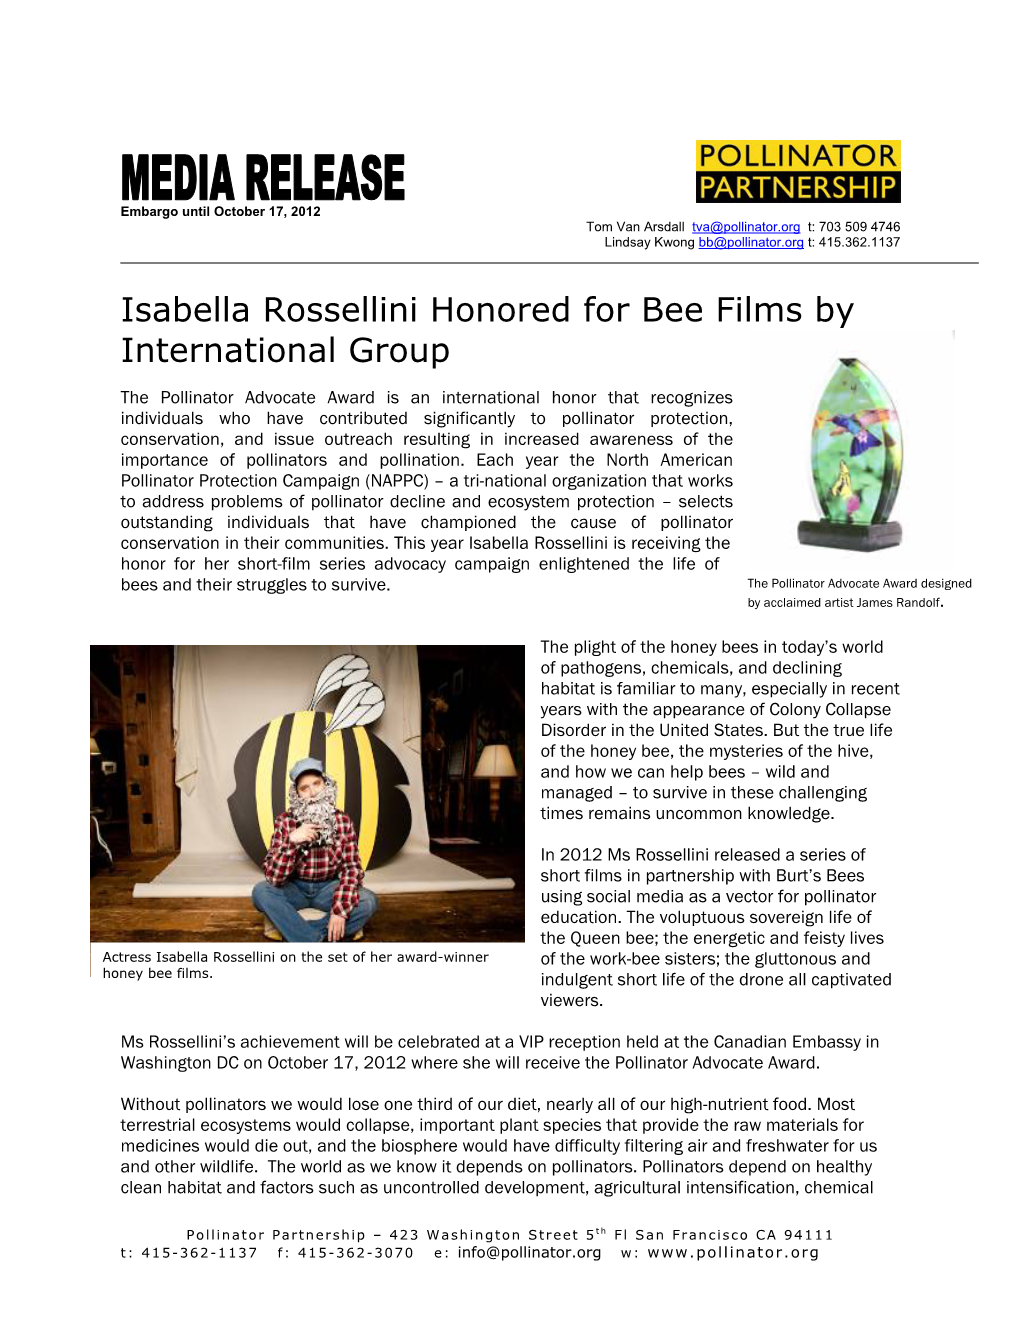 Isabella Rossellini Honored for Bee Films by International Group